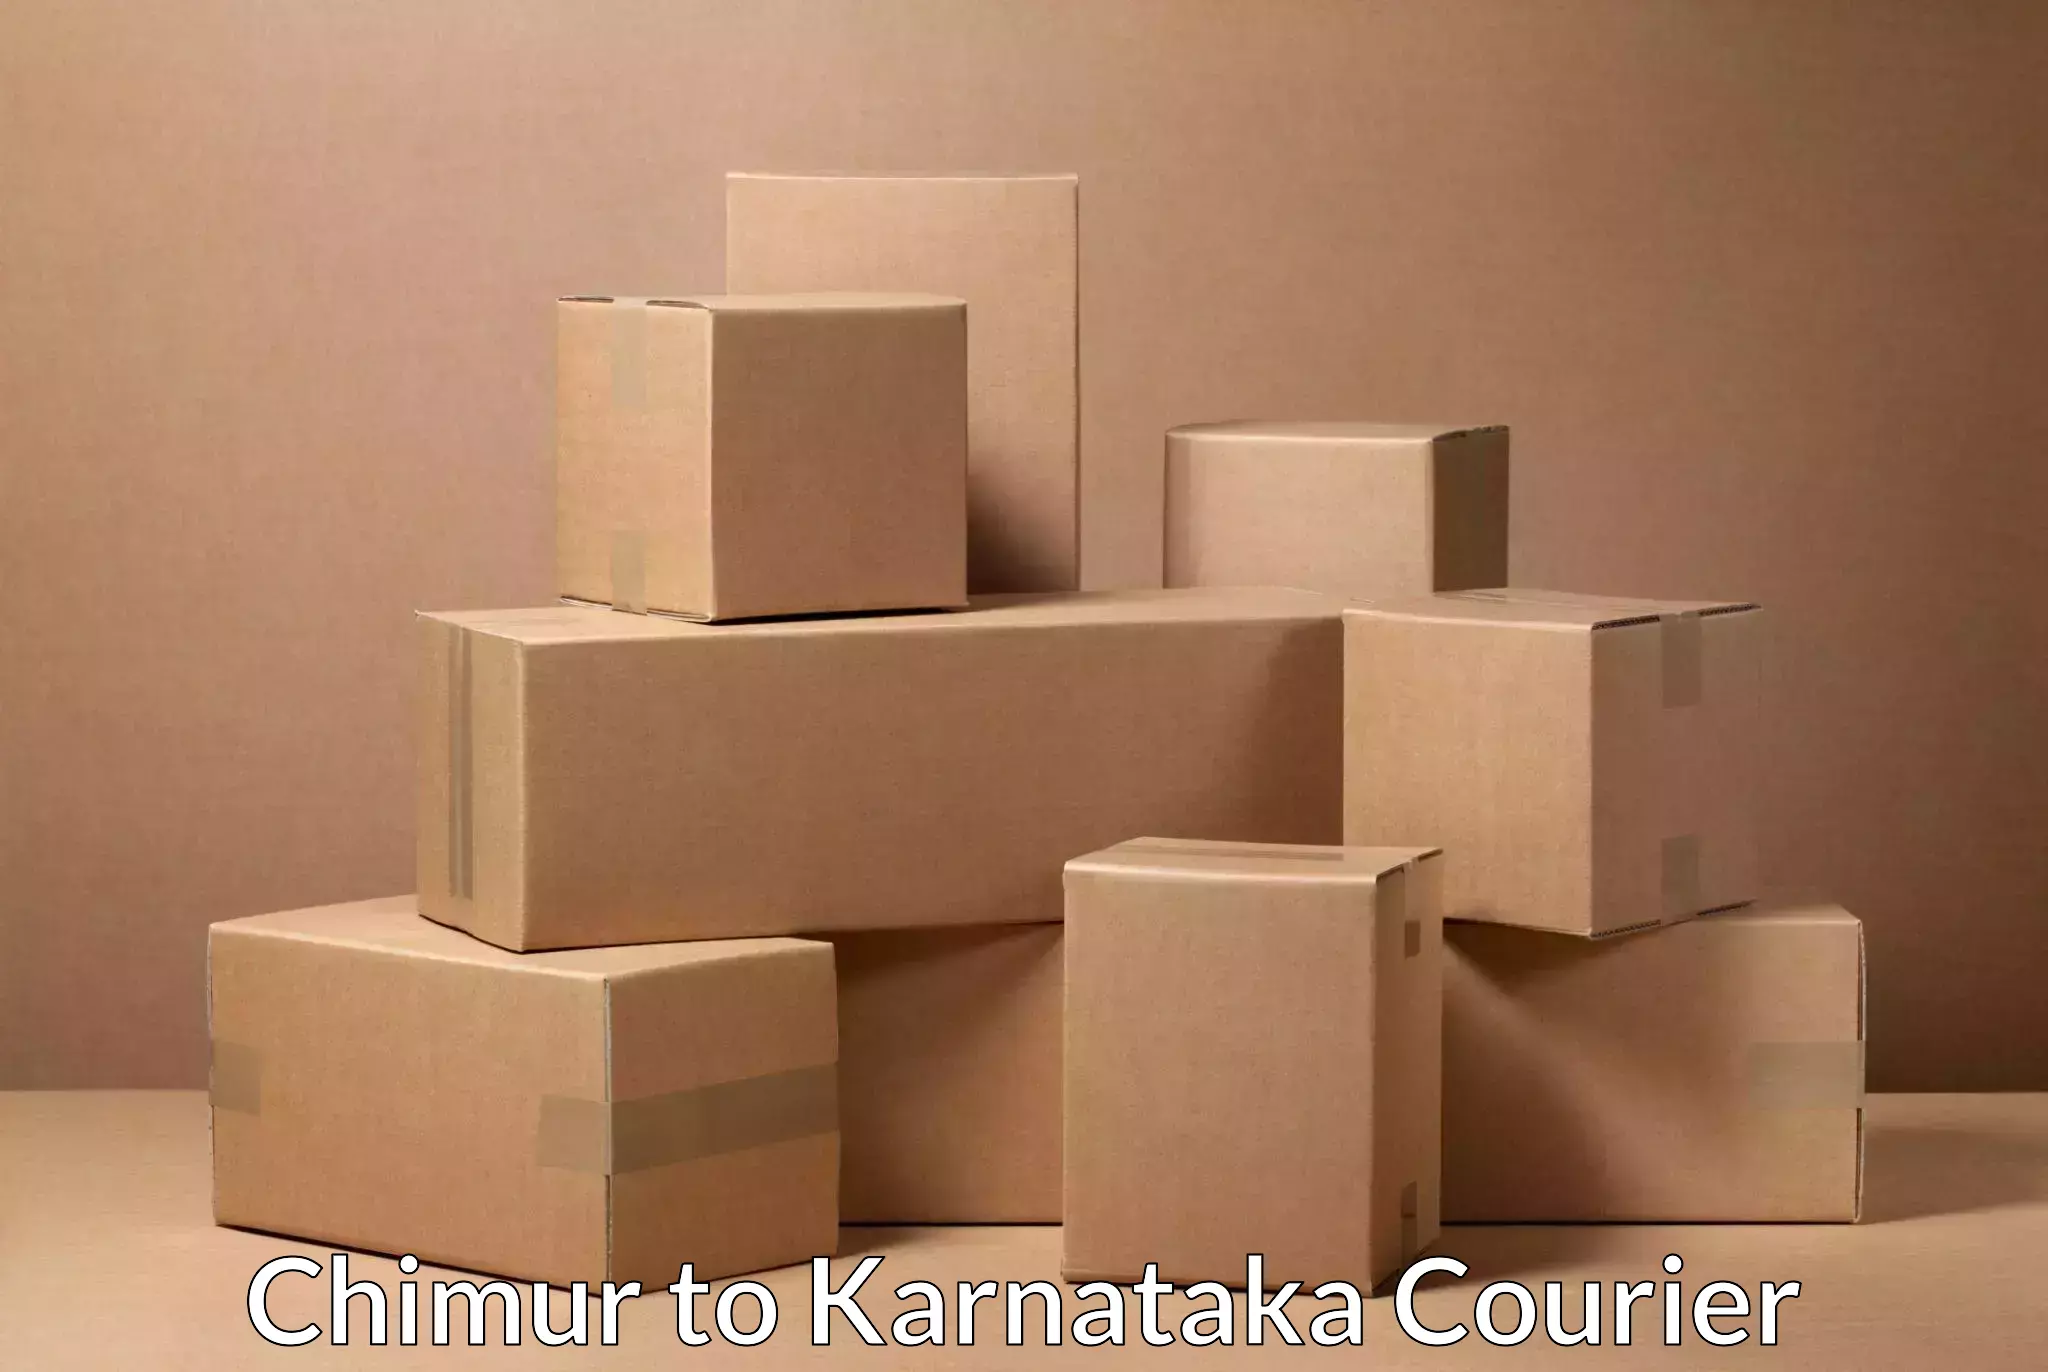 State-of-the-art courier technology Chimur to Chikodi